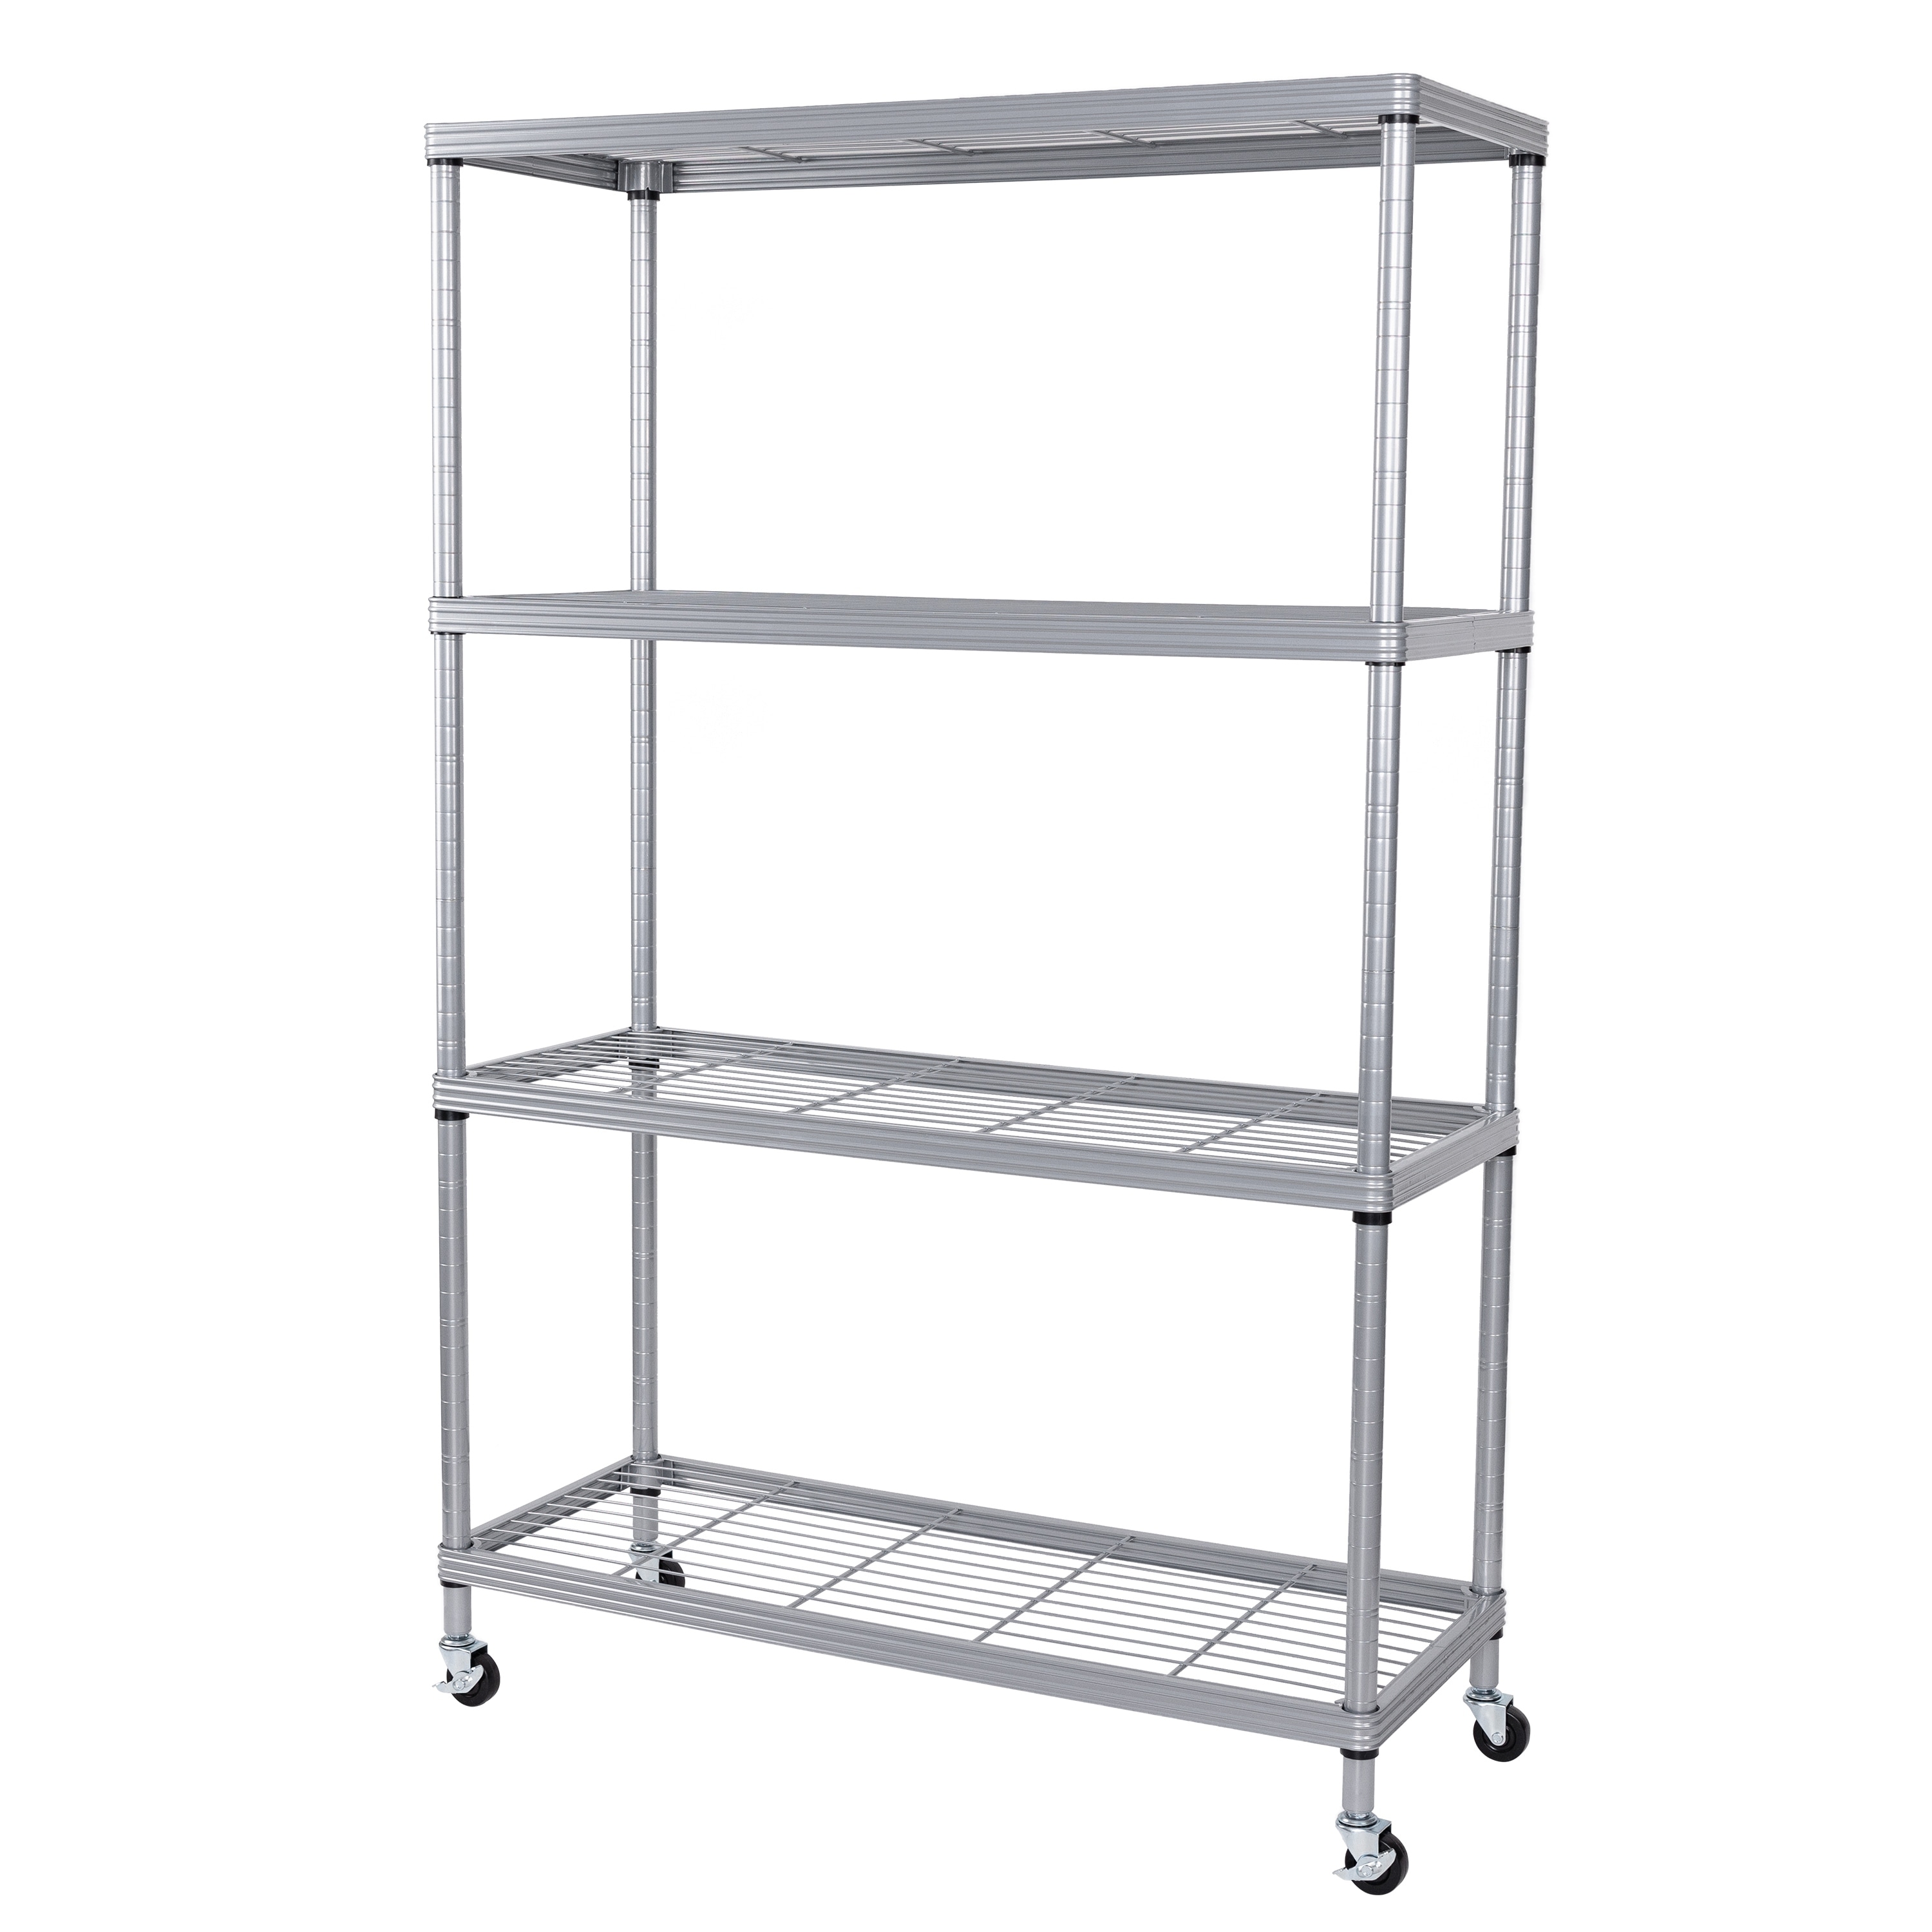 Shelving Inc. Black Wire Shelving with 3 Tier Shelves - 18 dx 48 wx 34  h, Weight Capacity 300lbs Per Shelf